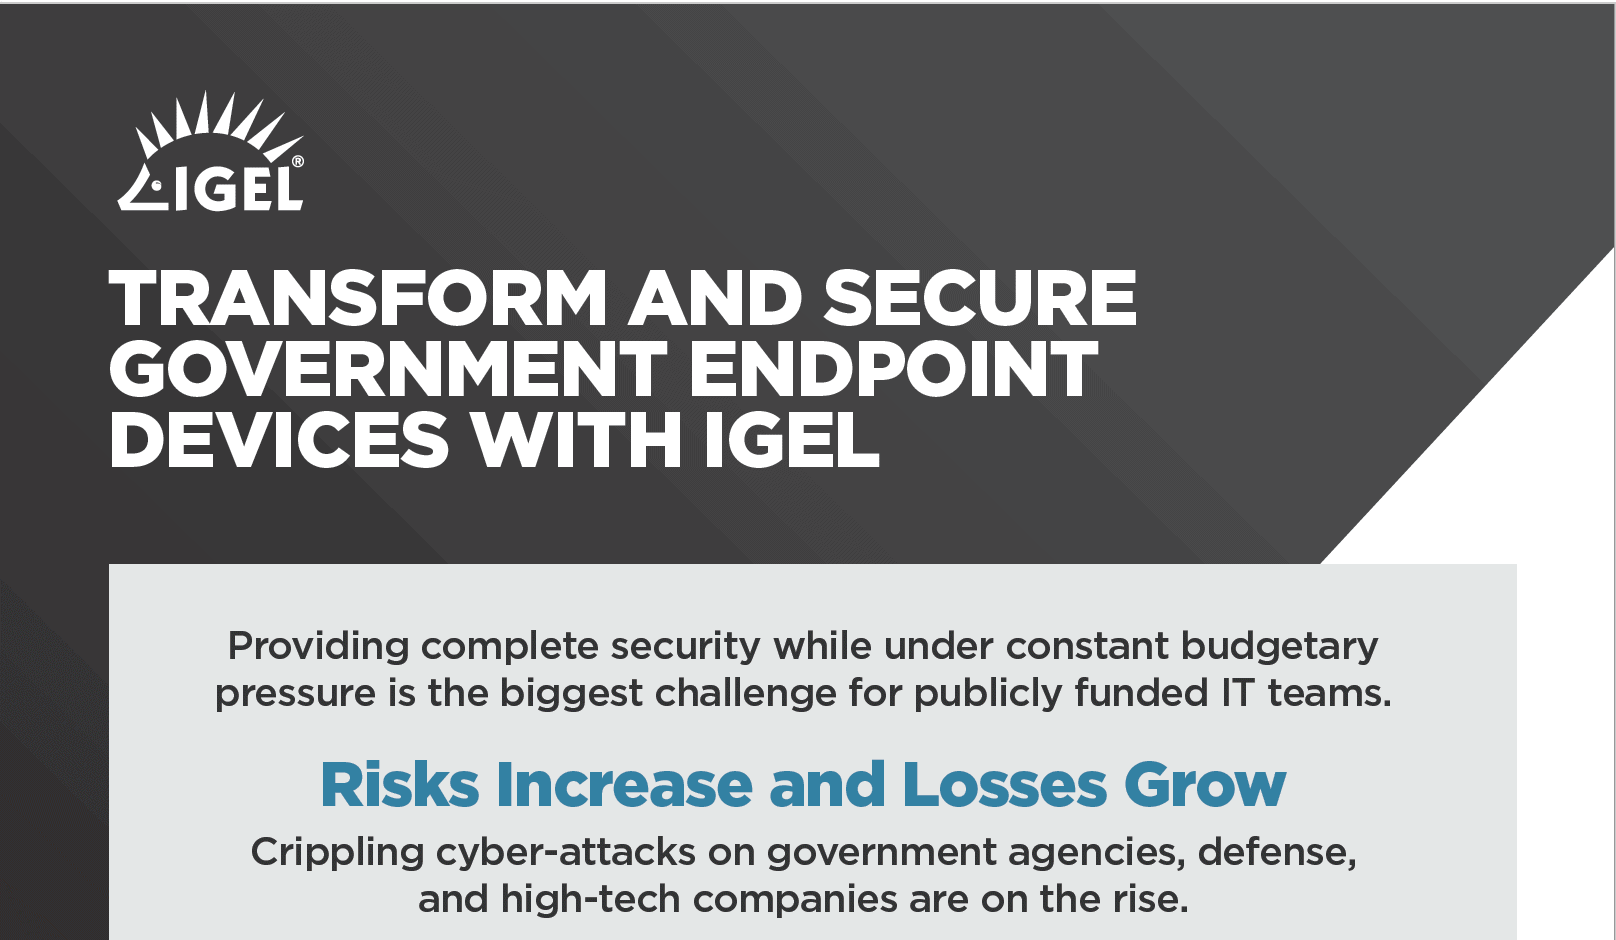 Transform and Secure Government Endpoint Devices with IGEL